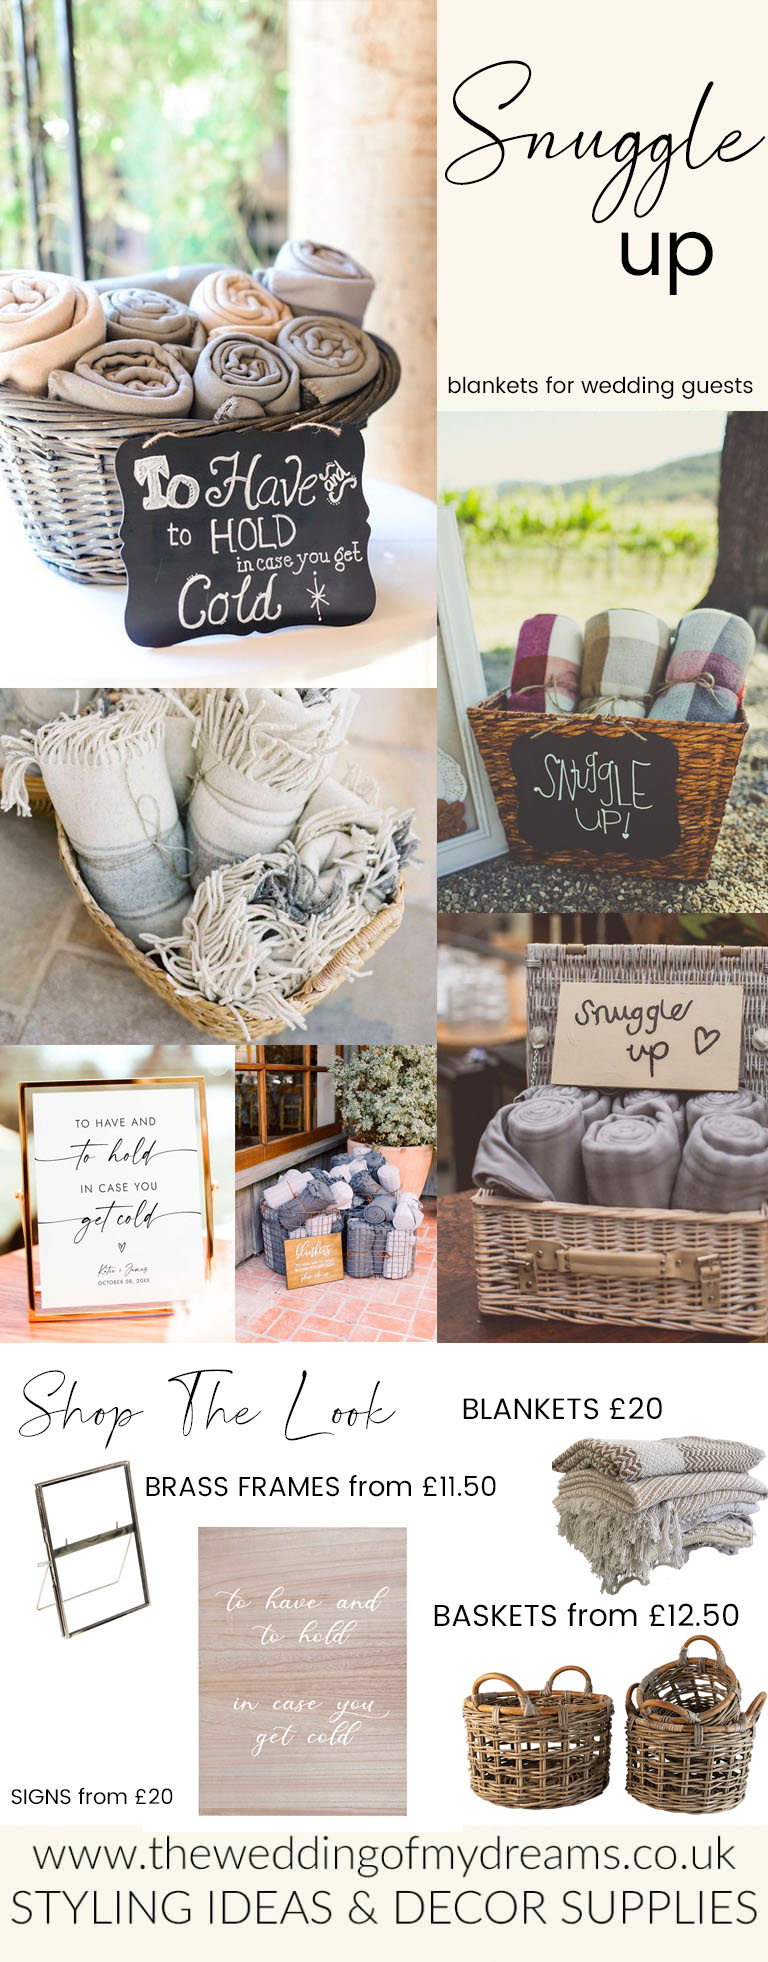 blankets for wedding guests to have and to hold in case you get cold